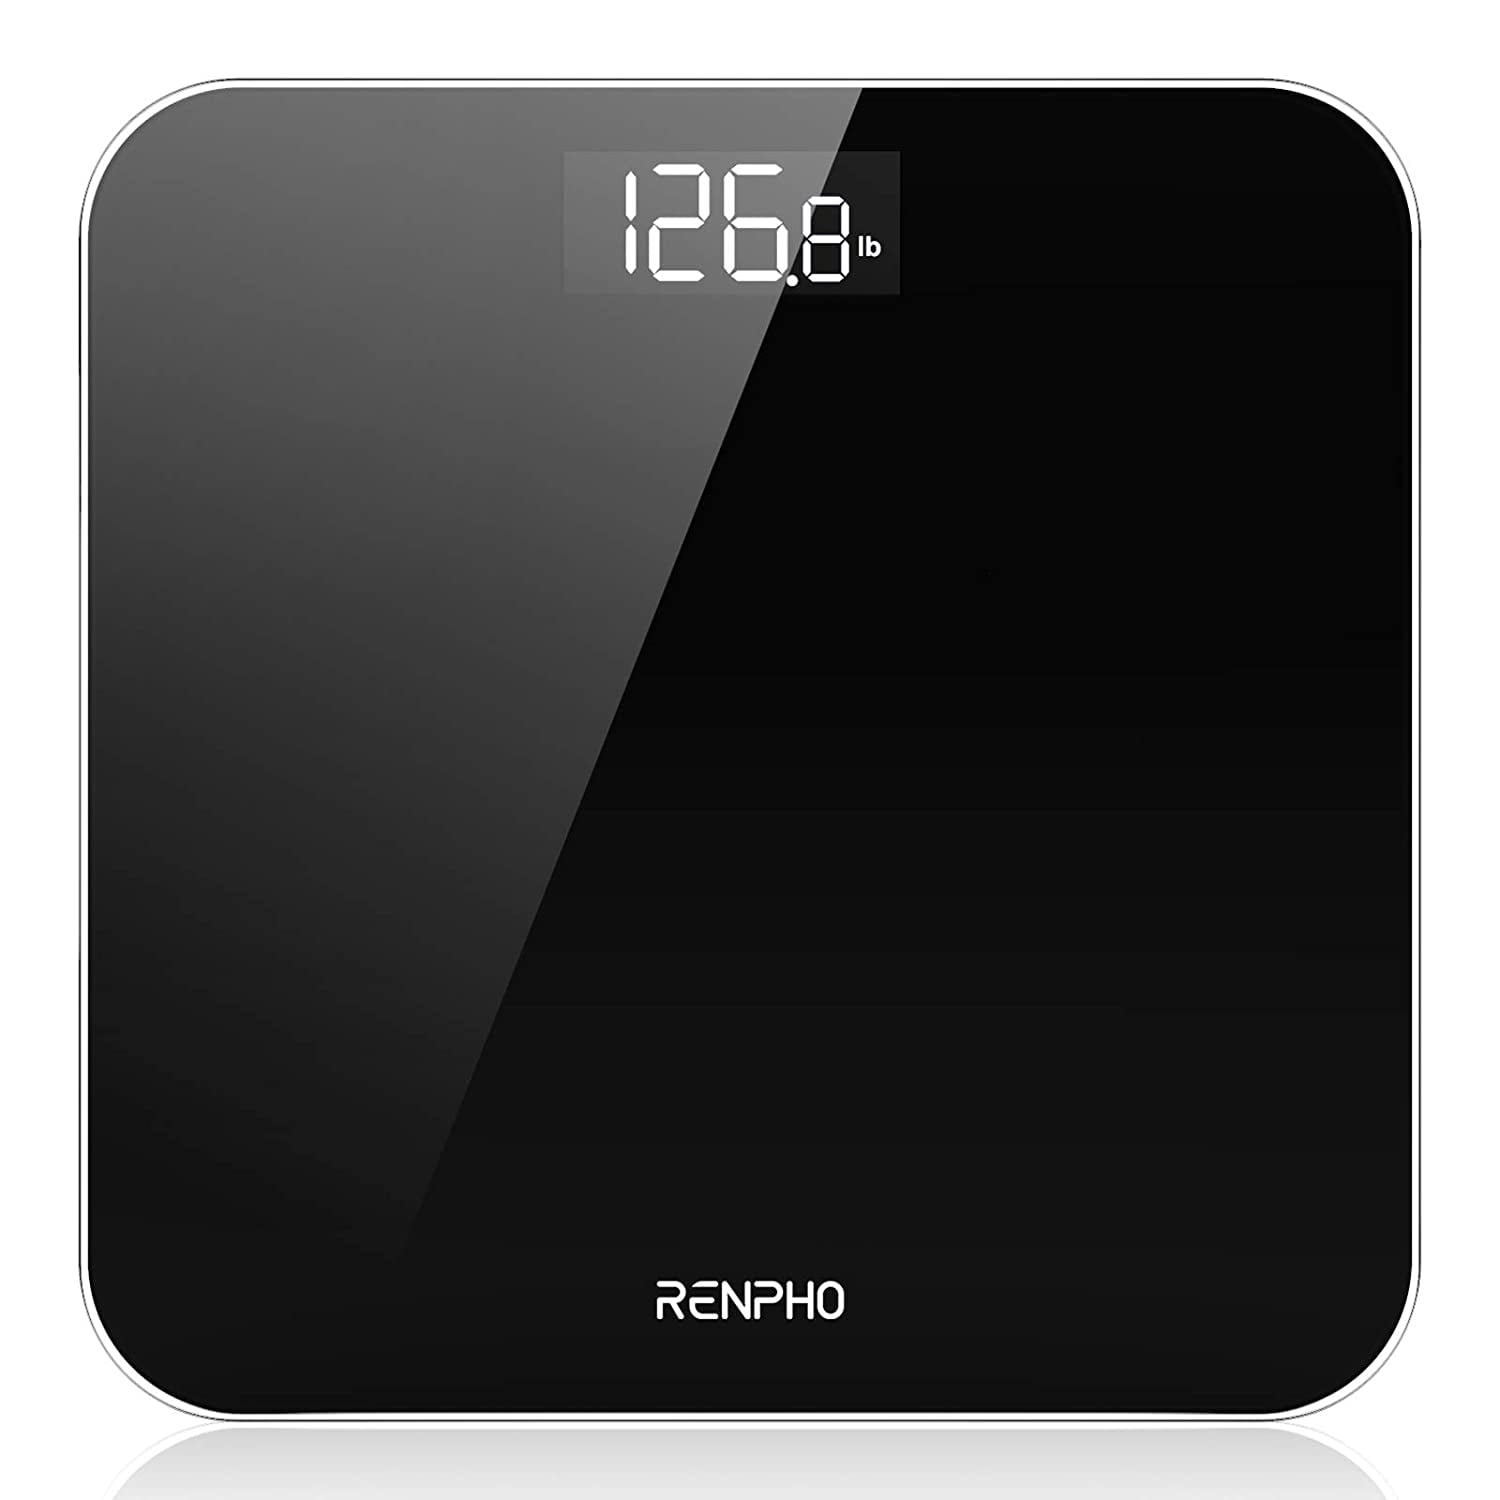 RENPHO Scale for Body Weight, Digital Weighing Elis 1 Scales with